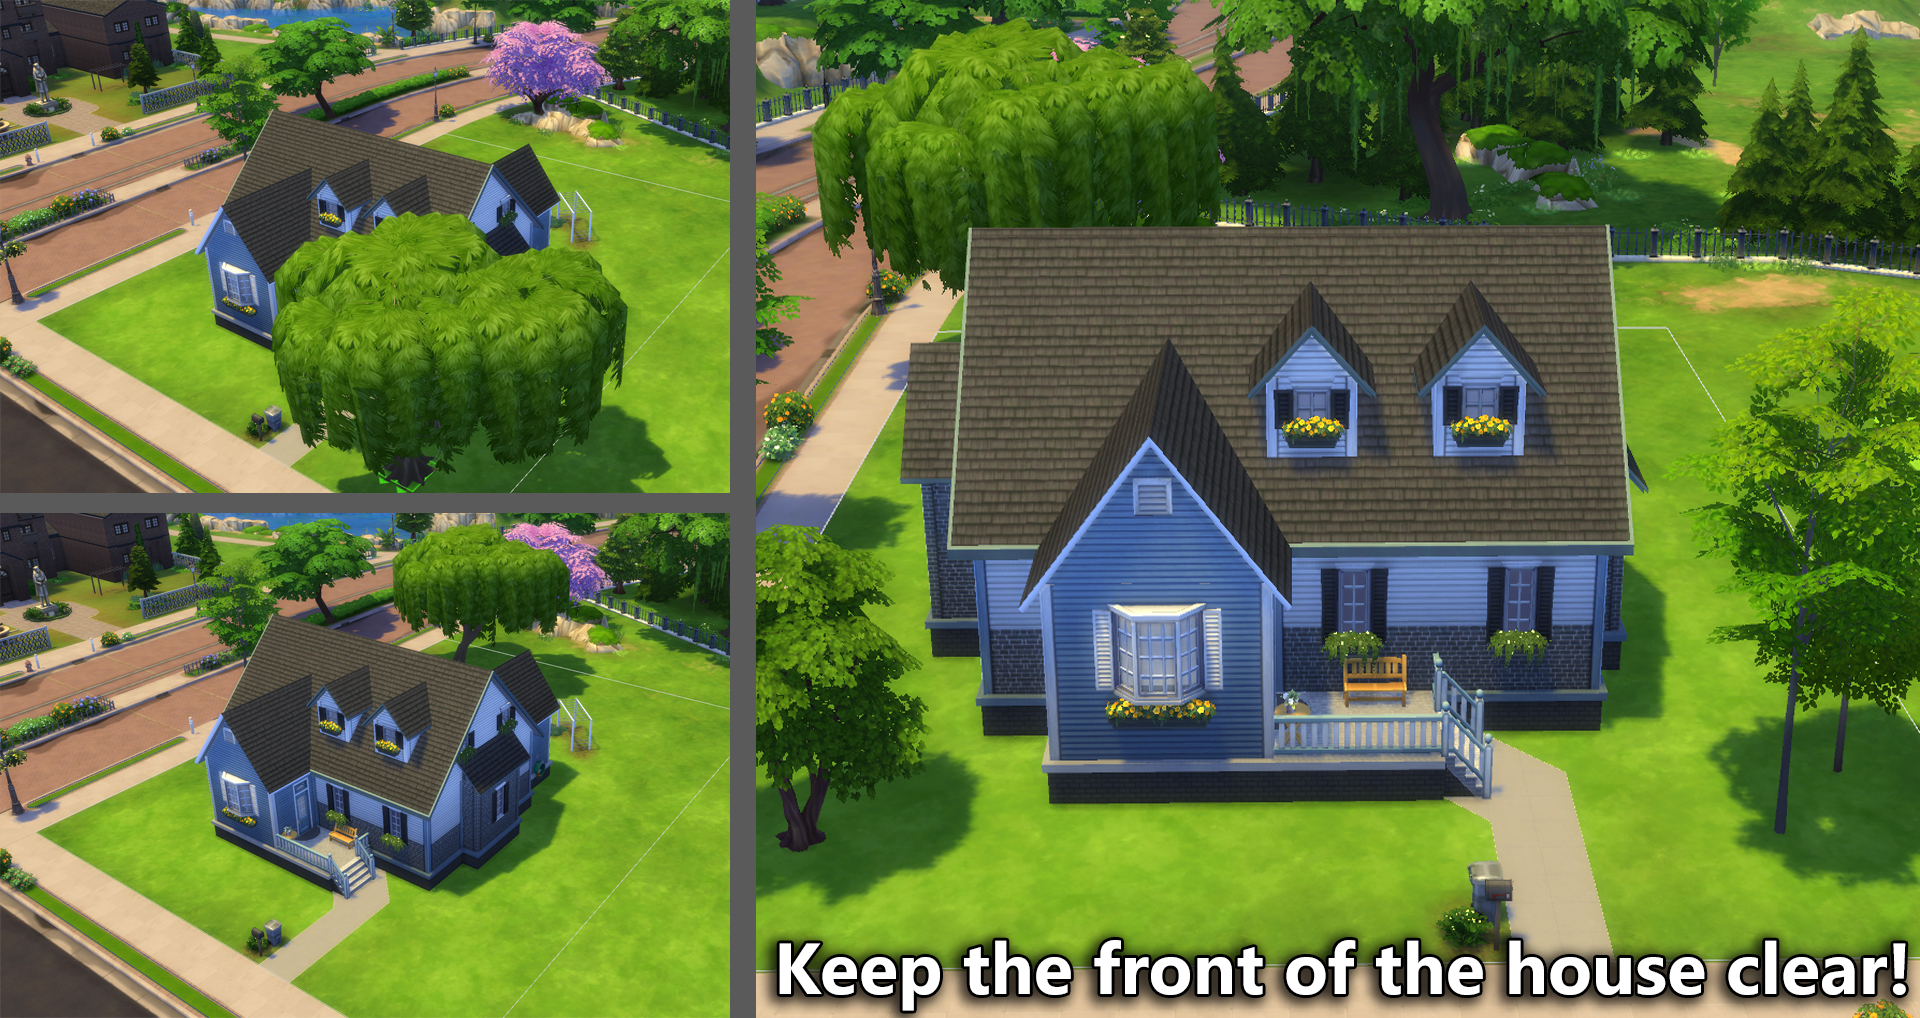 Building for Beginners in The Sims 4 (Landscaping)